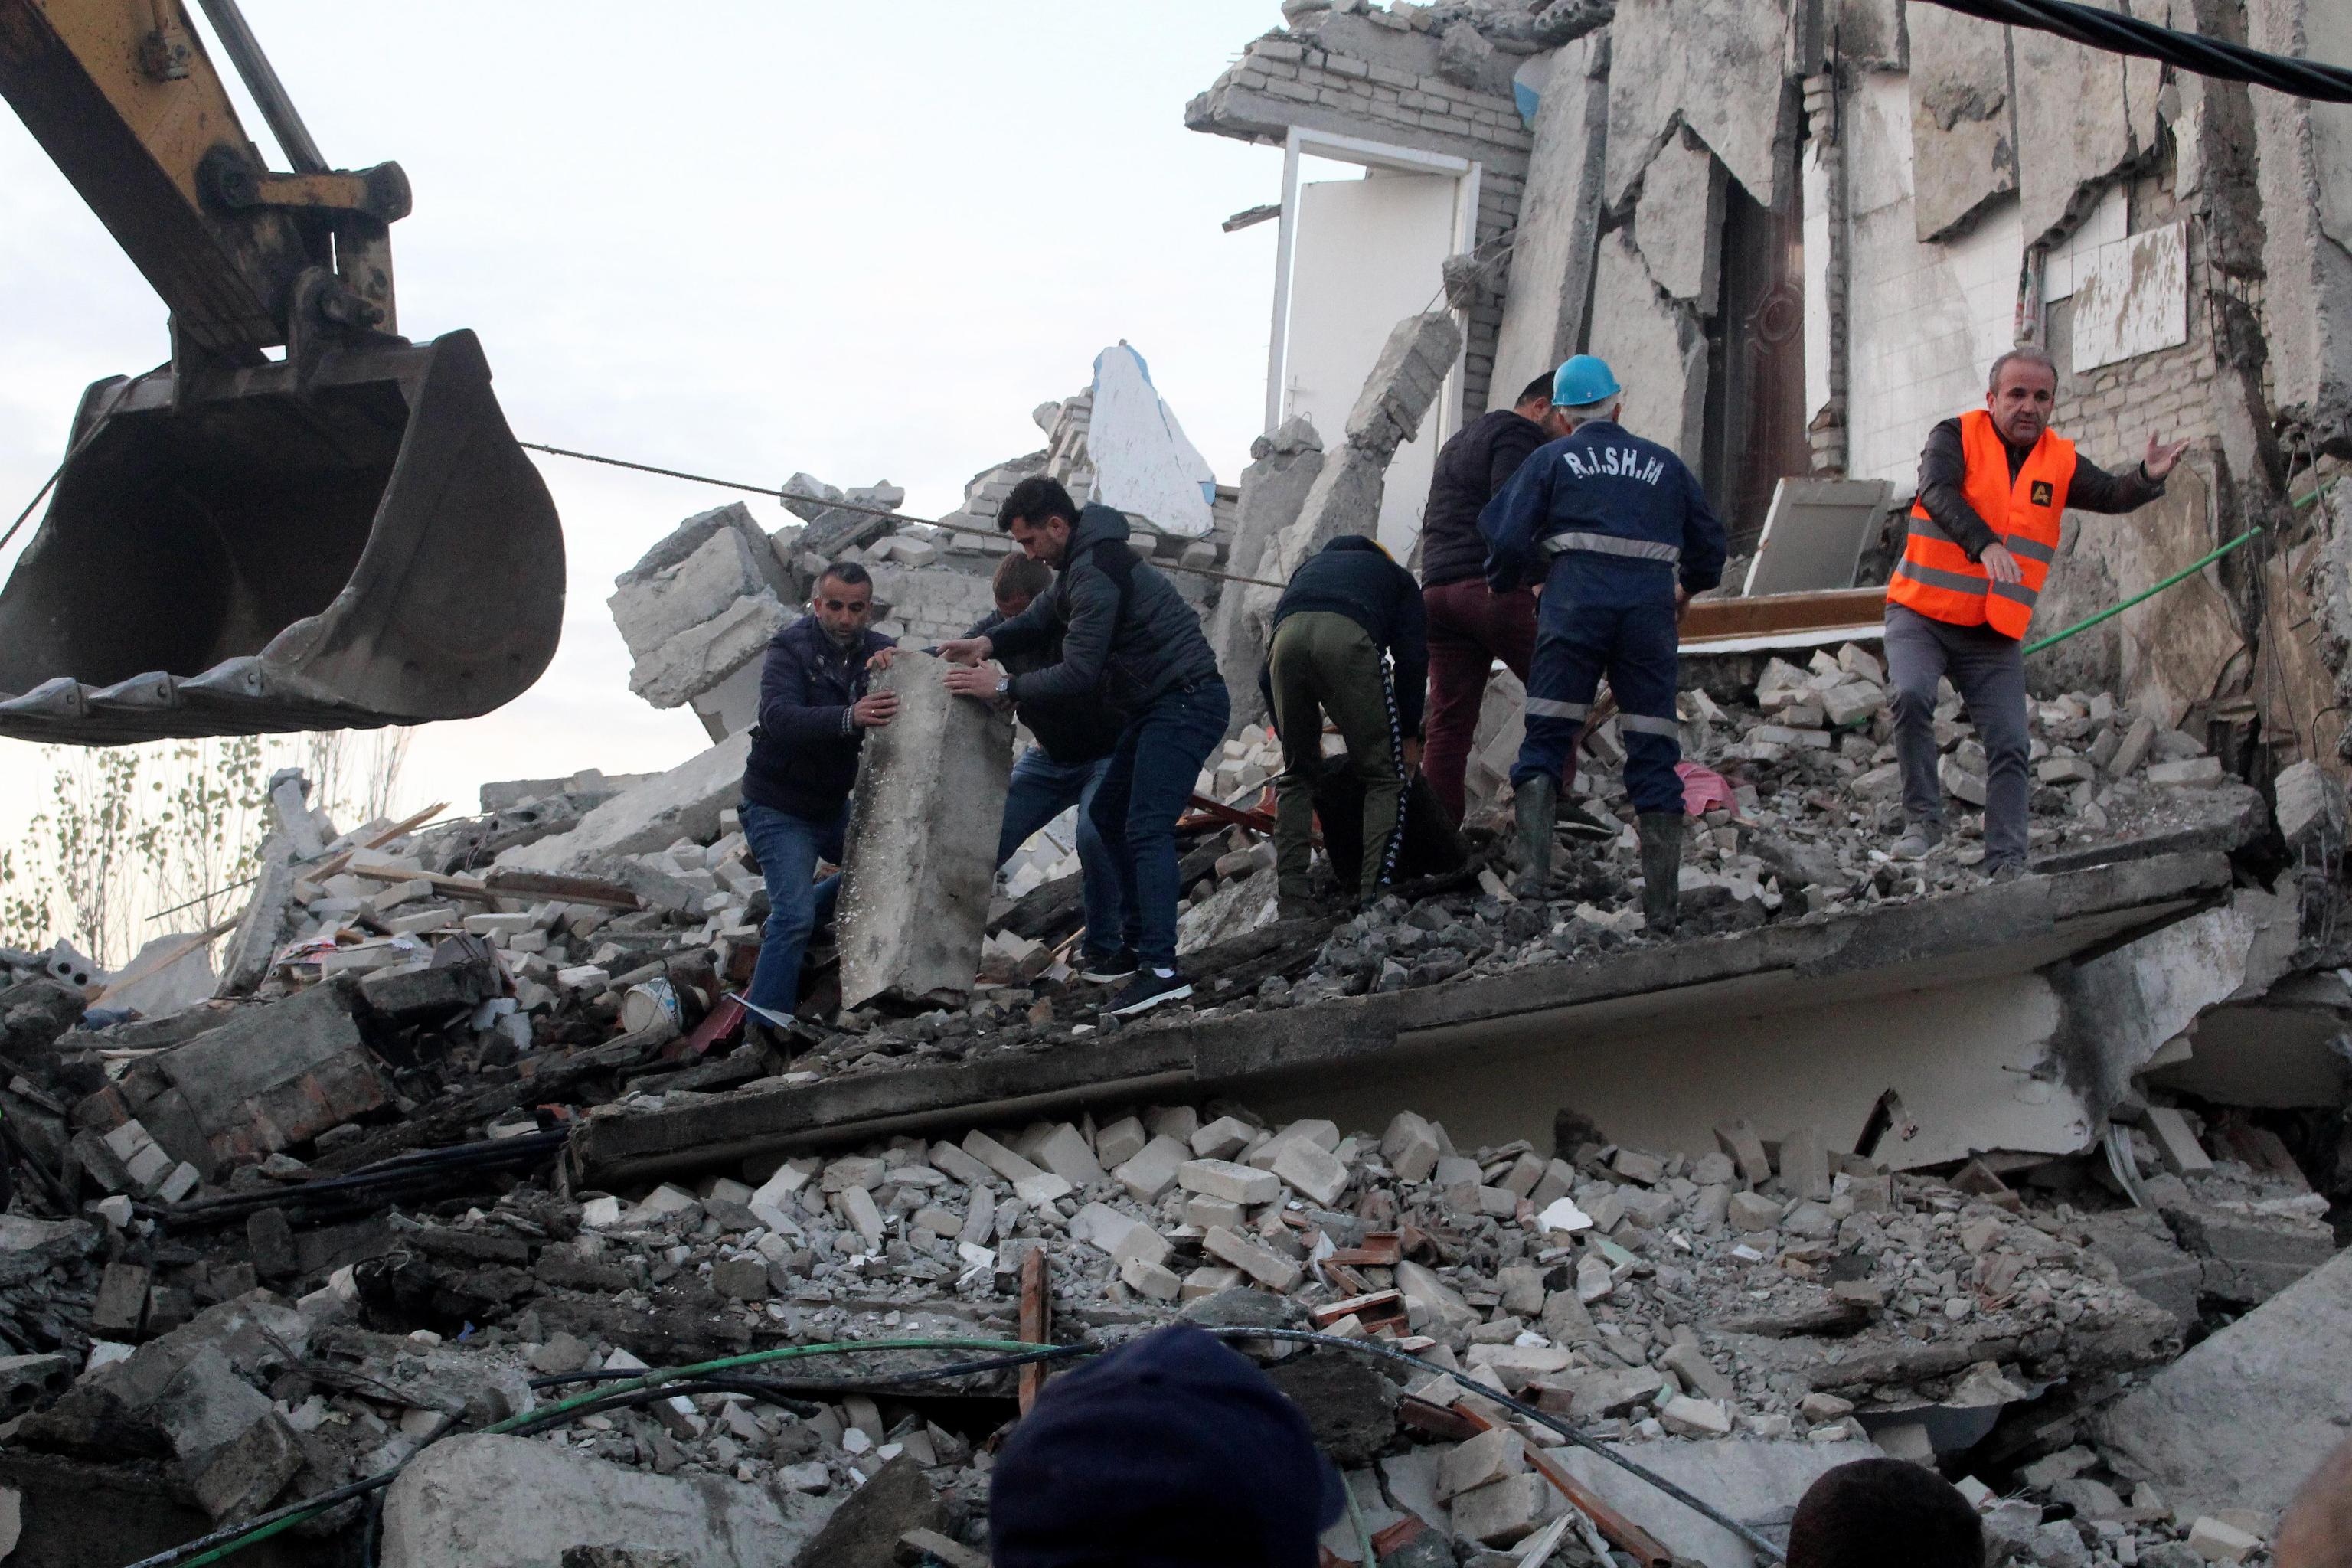 epa08025911 People search for survivors in the rubble of a building after an earthquake hit Thumane, Albania, 25 November 2019. Albania was hit by a 6.4 magnitude earthquake on 26 November 2019, leaving three people dead and dozens injured.  EPA/MALTON DIBRA